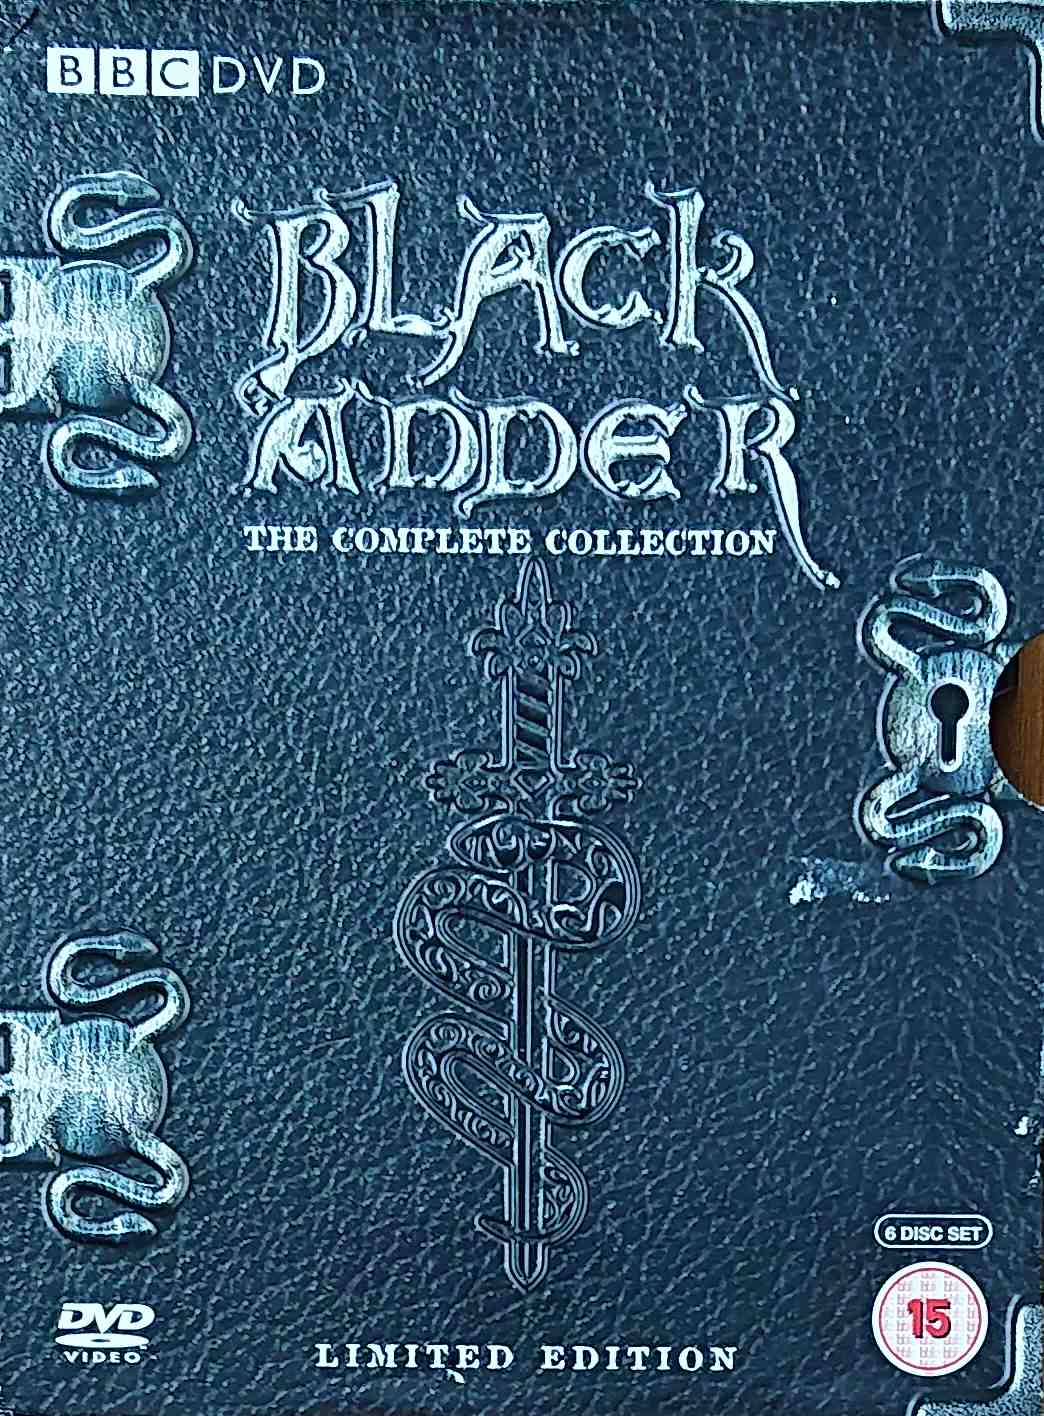 Picture of BBCDVD 1746 Black Adder - The complete collection by artist Richard Curtis / Rowan Atkinson / Ben Elton from the BBC dvds - Records and Tapes library